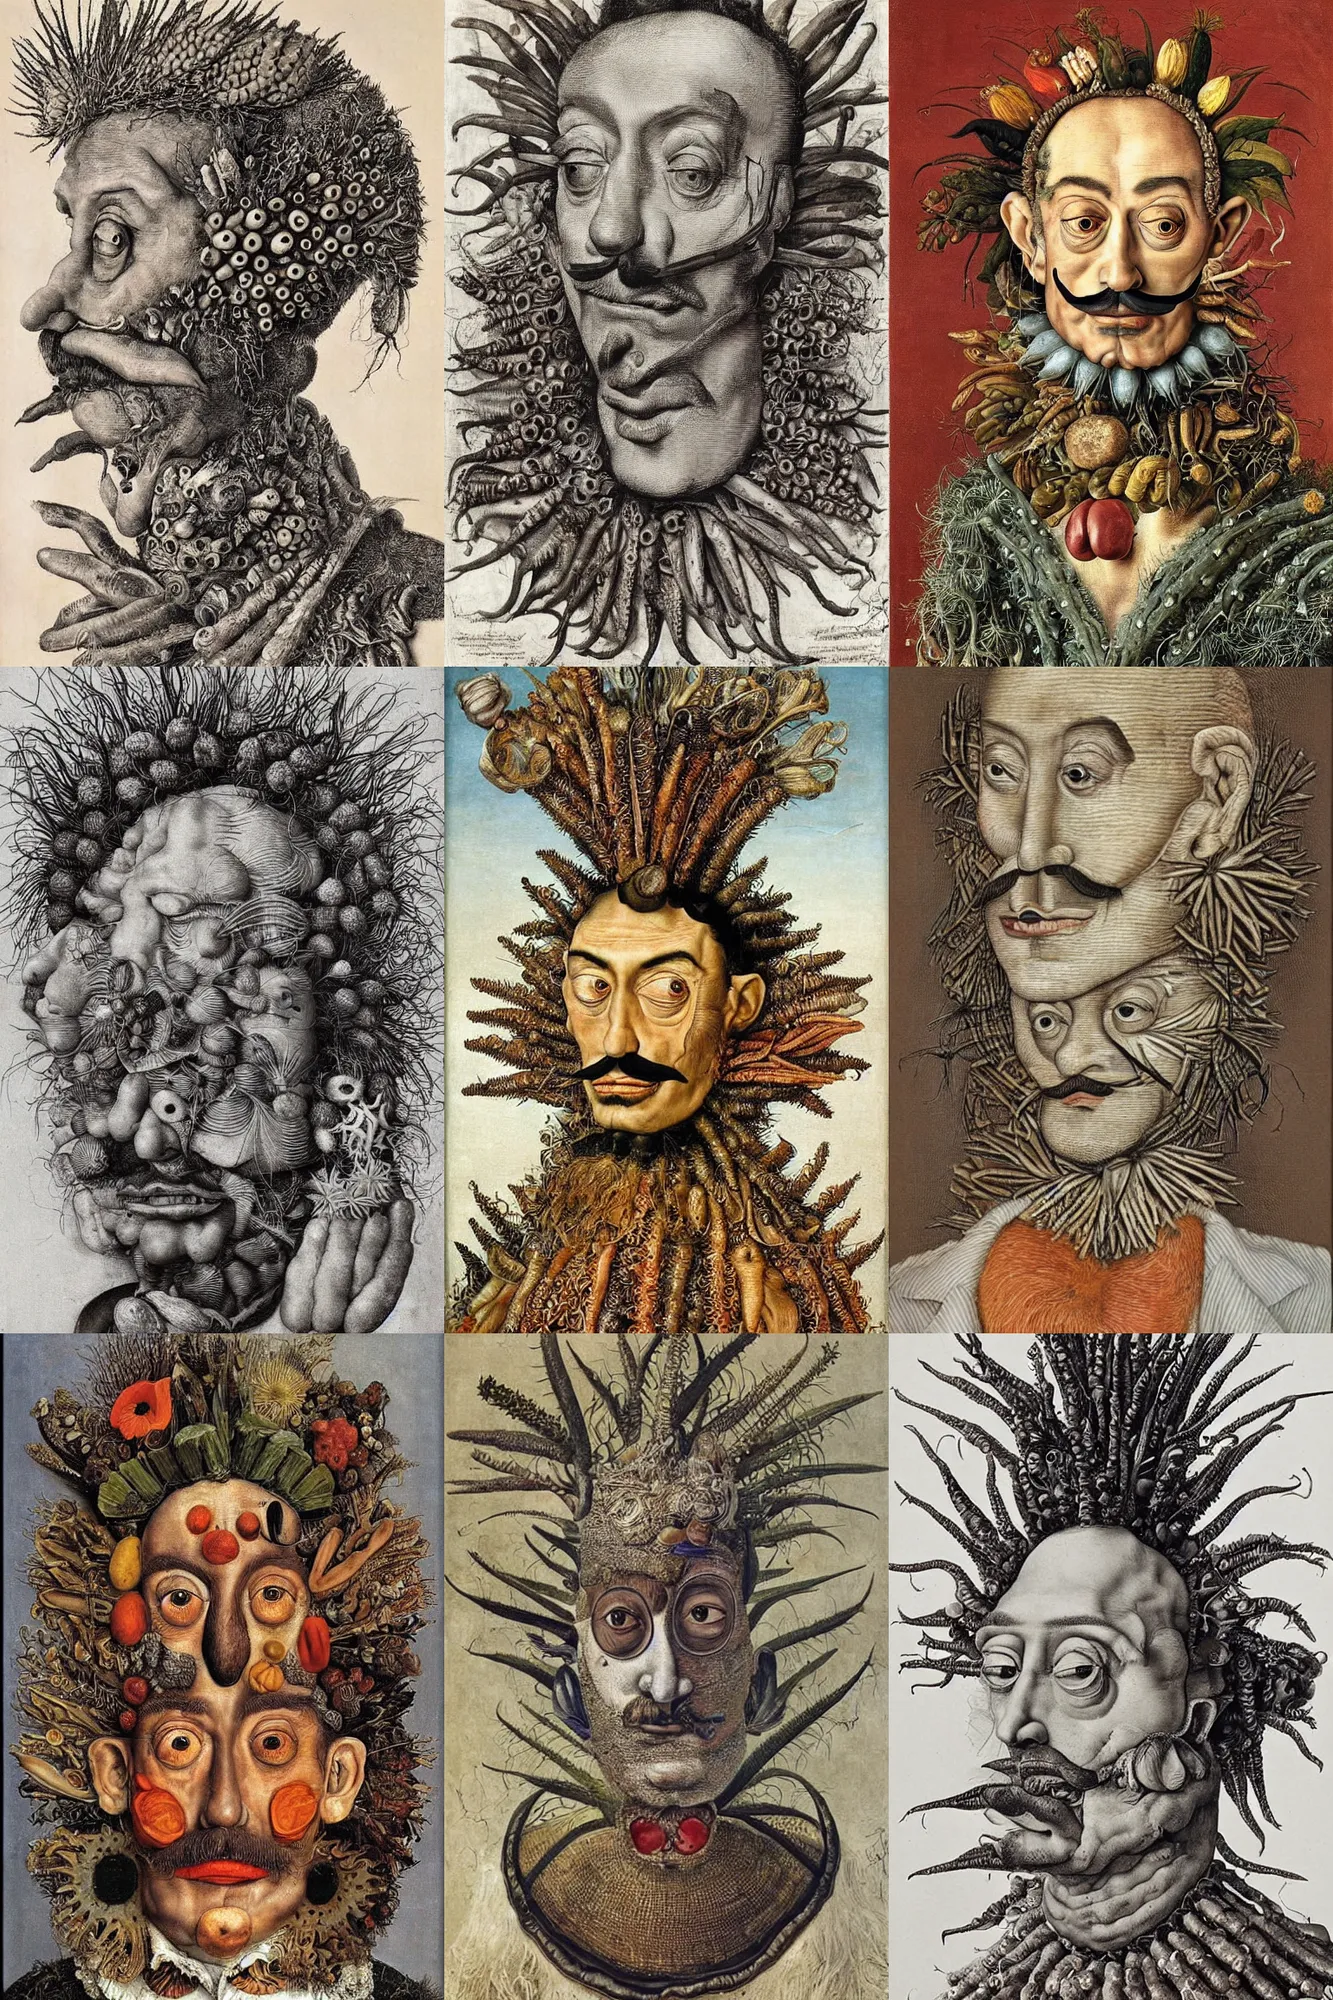 Prompt: giuseppe arcimboldo's portrait of salvador dali made out of echinoderms